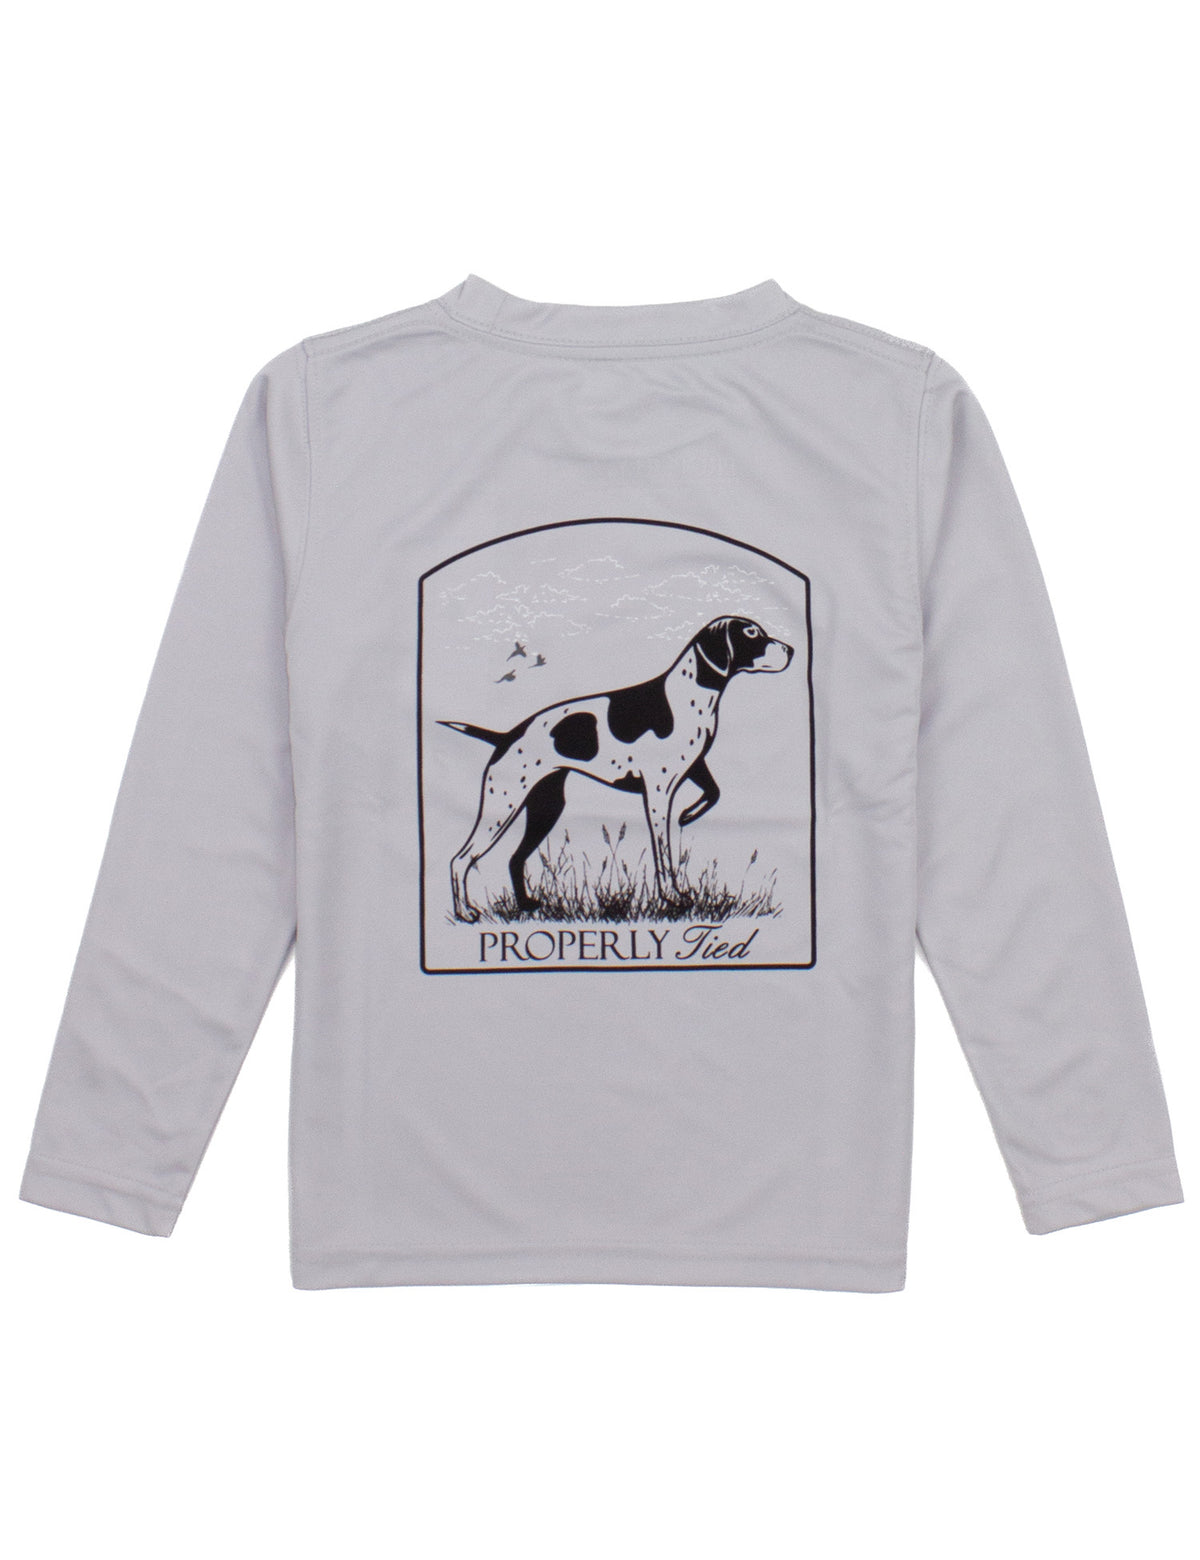 Boys Performance L/S Tee - Standing Pointer